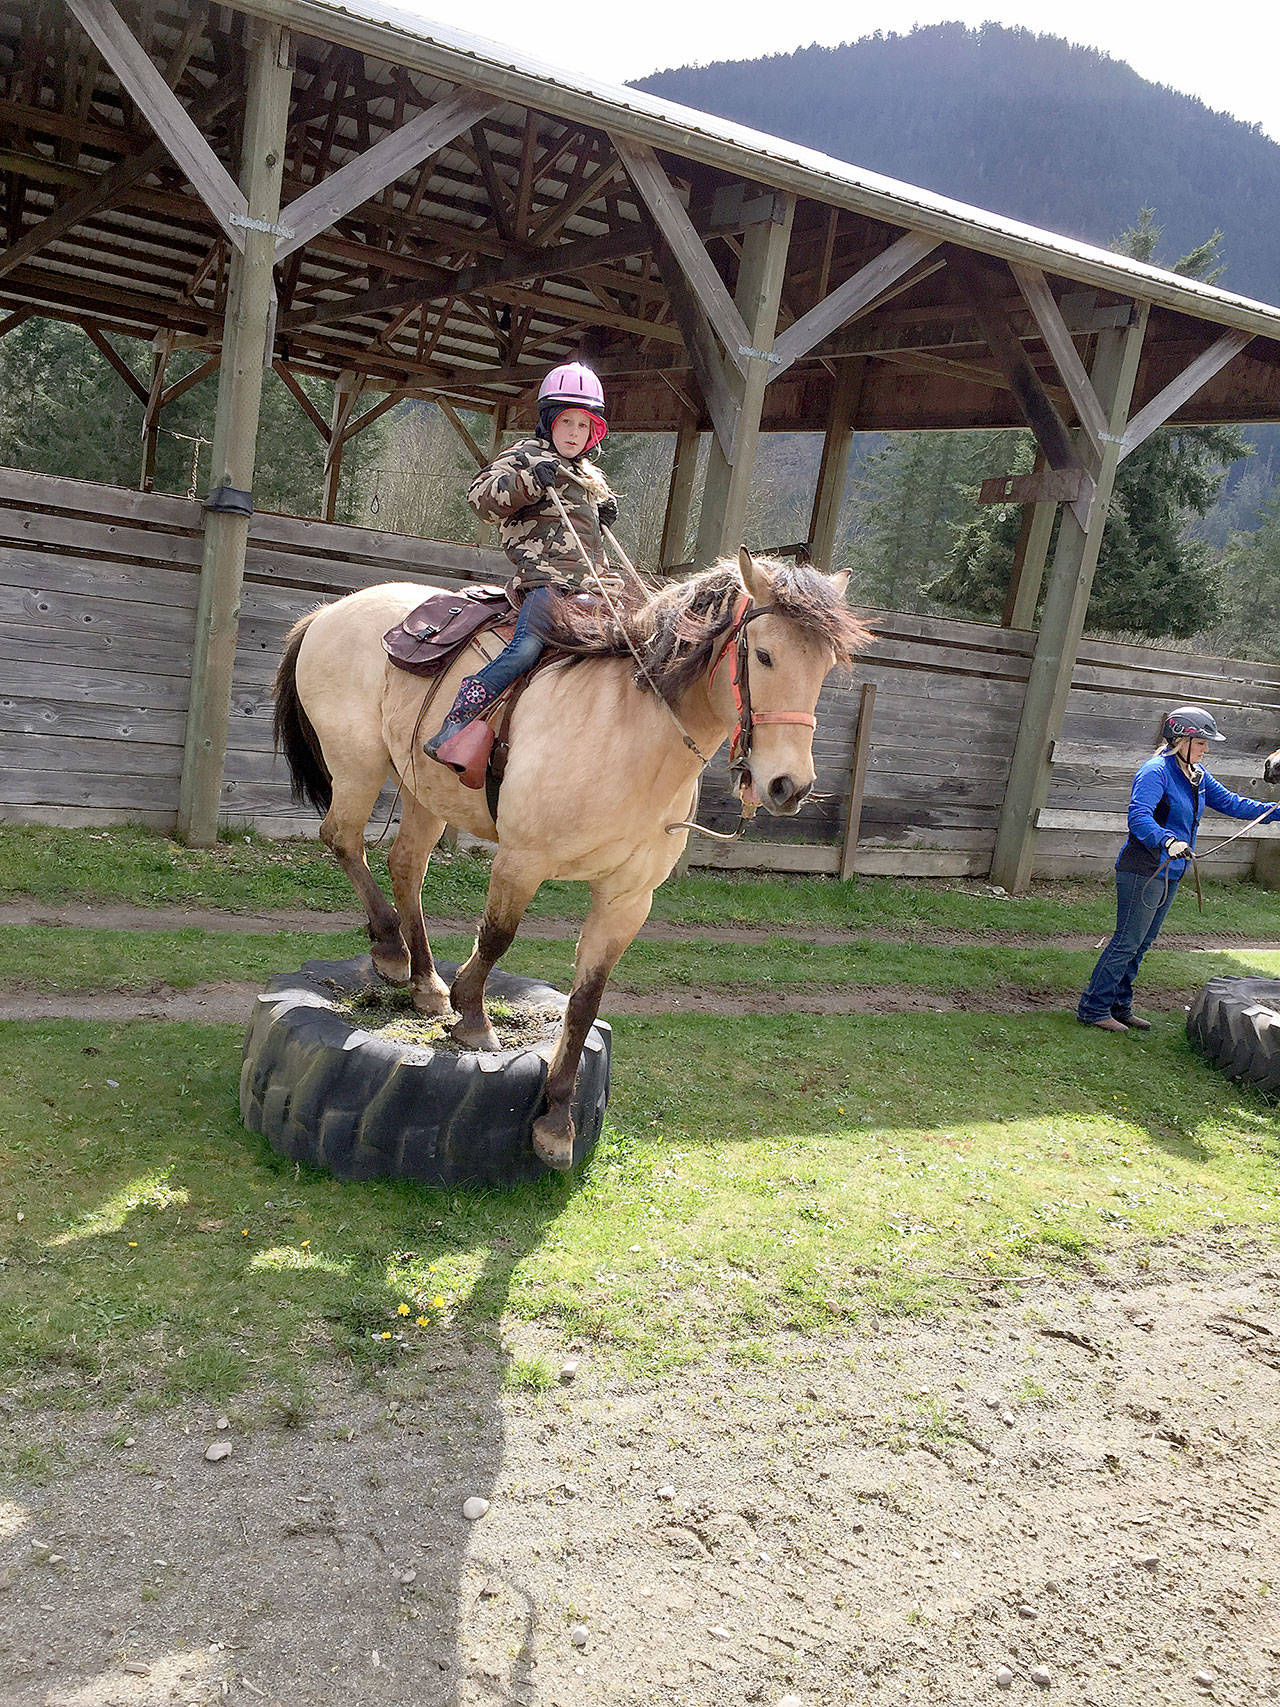 When the Mount Olympus Chapter of Back Country Horsemen held a spring tuneup day at Spirit Horse Ranch last month Rylie Baysinger, 8, learned how to guide her horse, Scout, to step all four legs onto the tractor tire, stand still and then turn to the right before stepping down. (Sherry Baysinger)